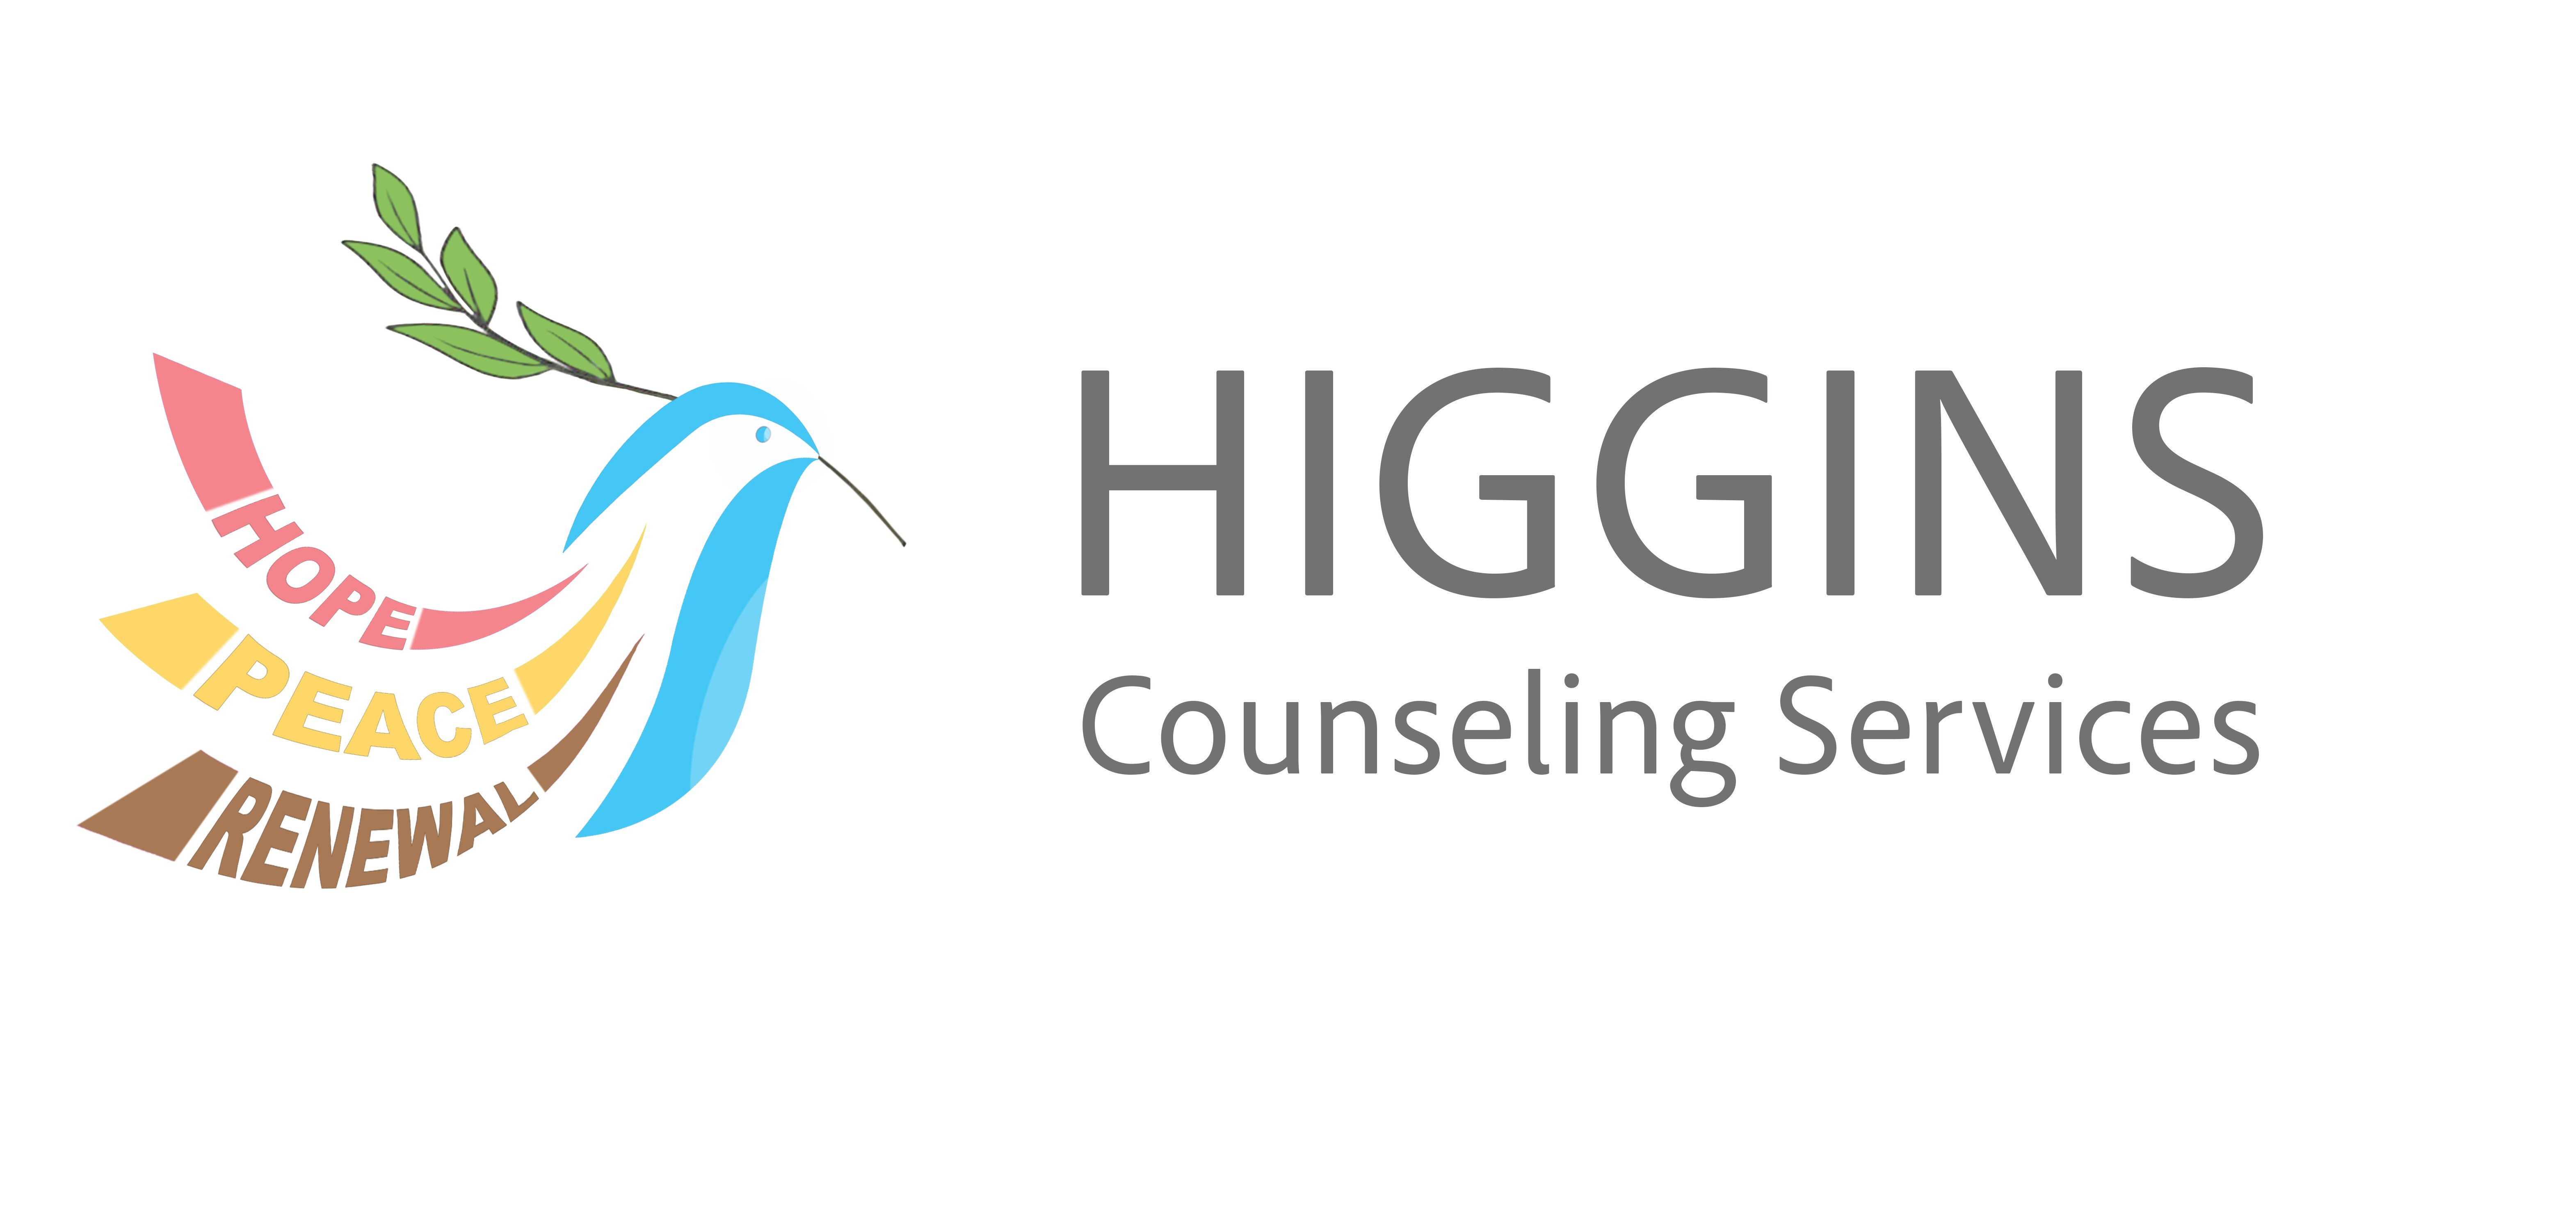 Higgins Counseling Services